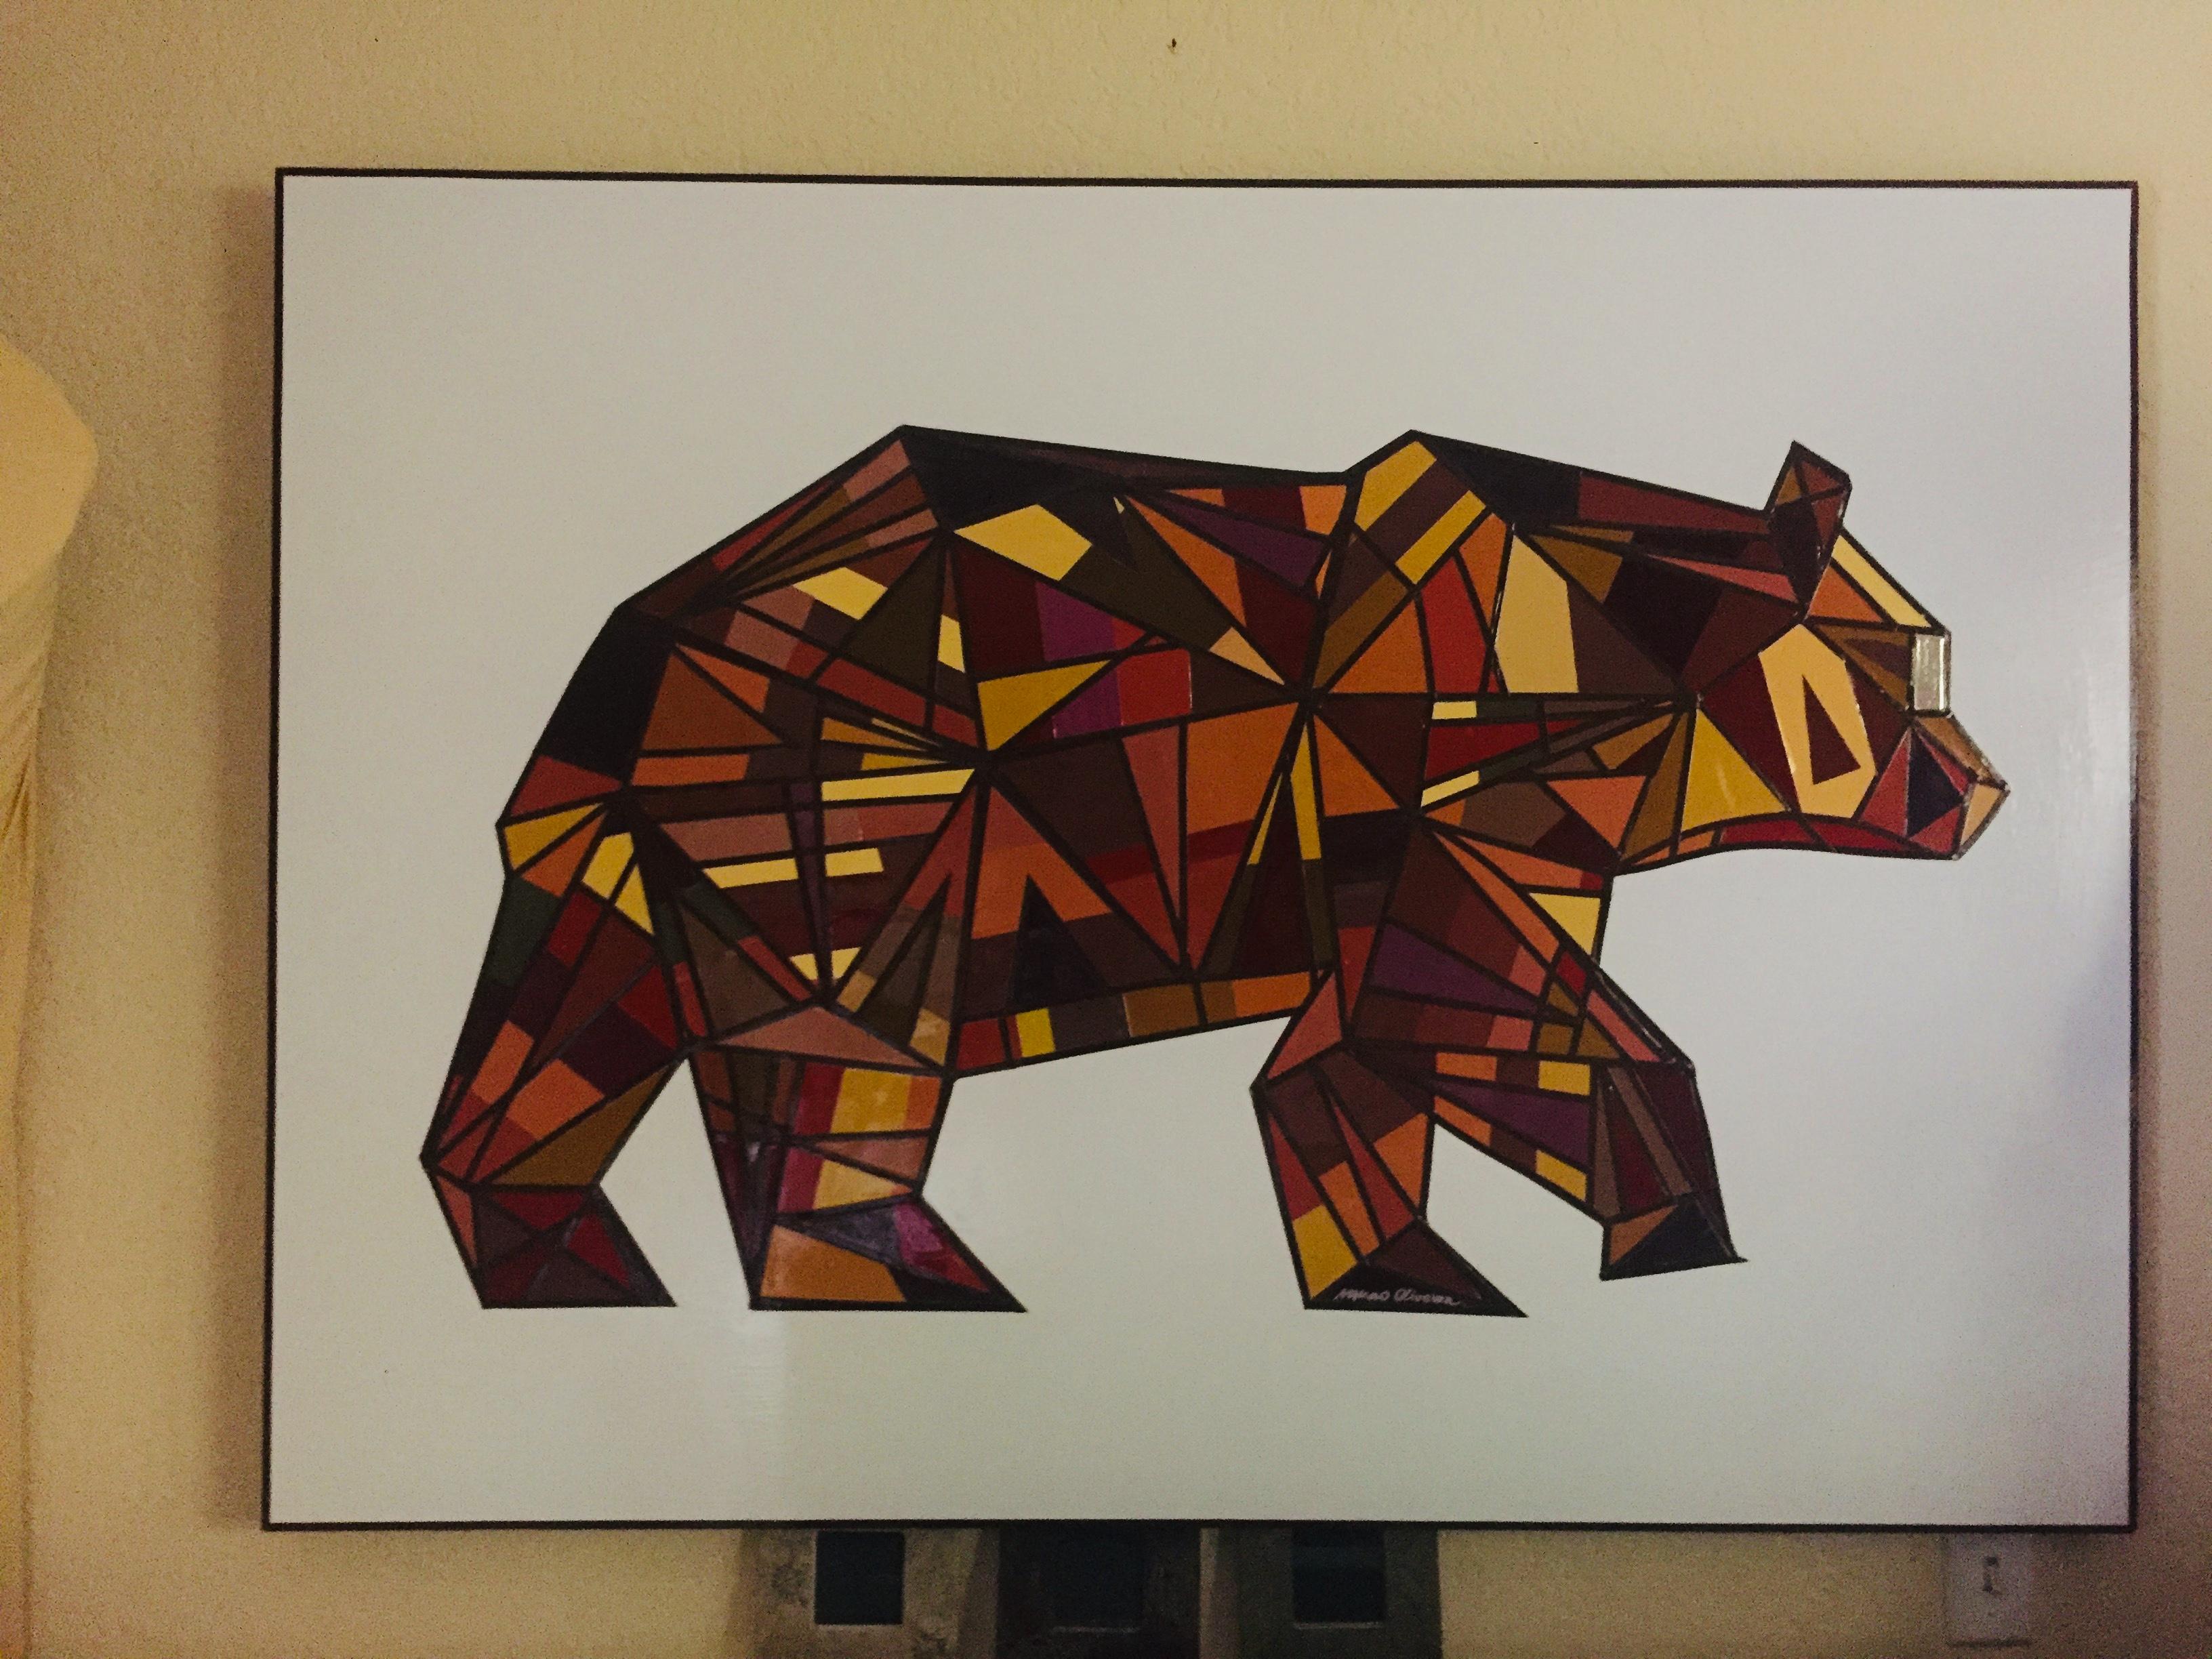 This original California Lucky Bear design is composed of mosaic sections and each section is glued with different color samples on wood panel. A few coats of a glossy varnish were applied to protect the piece. The result is a beautiful piece with 3